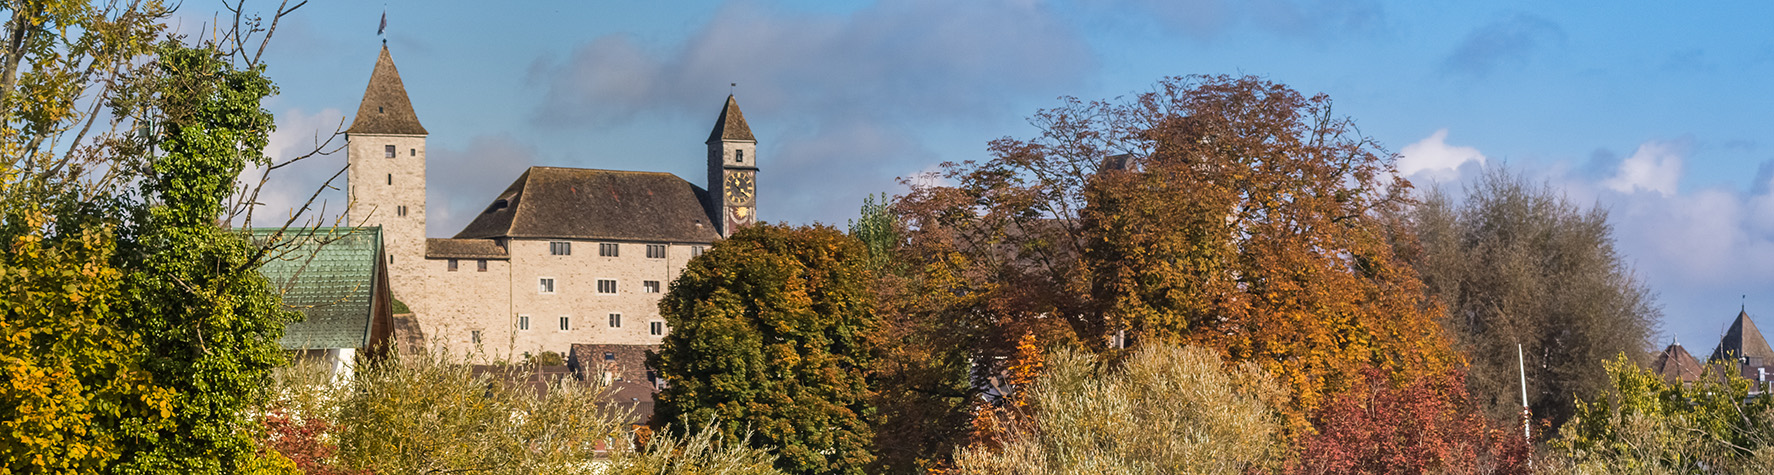 The,Old,Medieval,City,Of,Rapperswil,Perched,Atop,A,Rocky